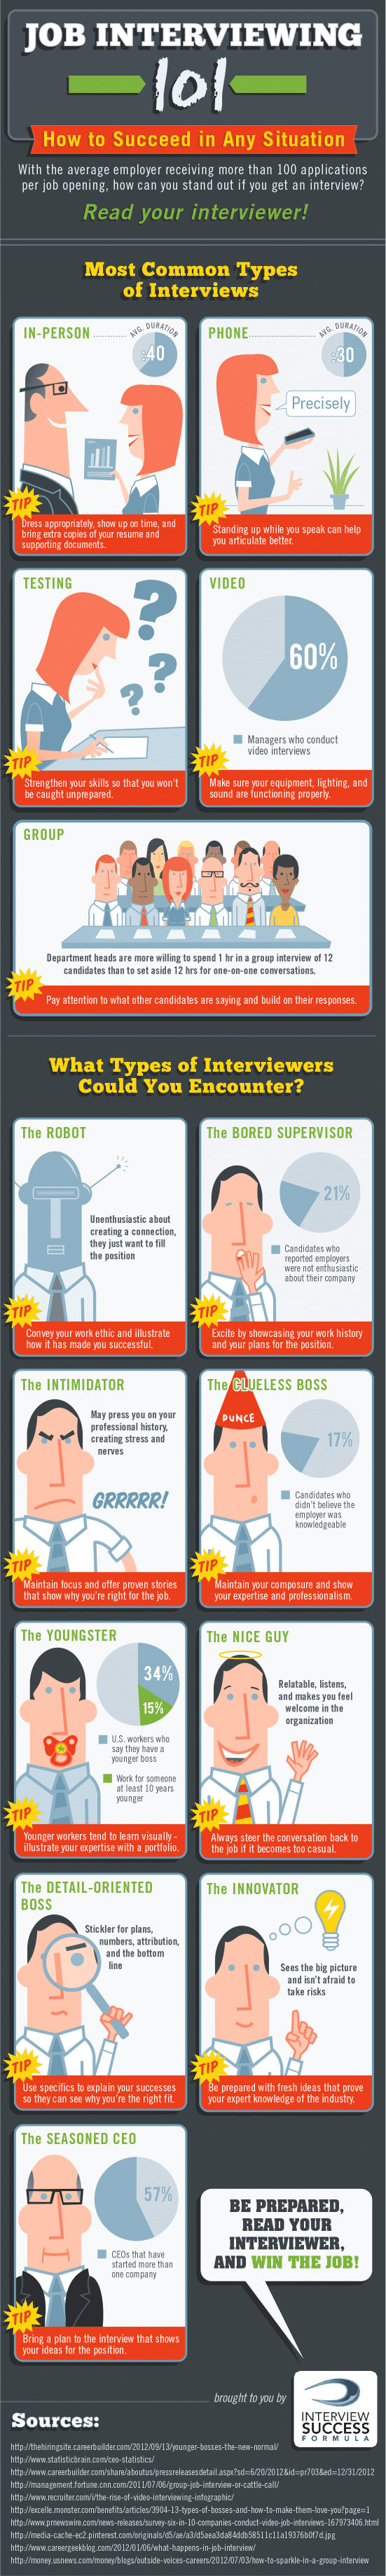 14 Job Interview Tips That Will Get You The Job [Infographic]